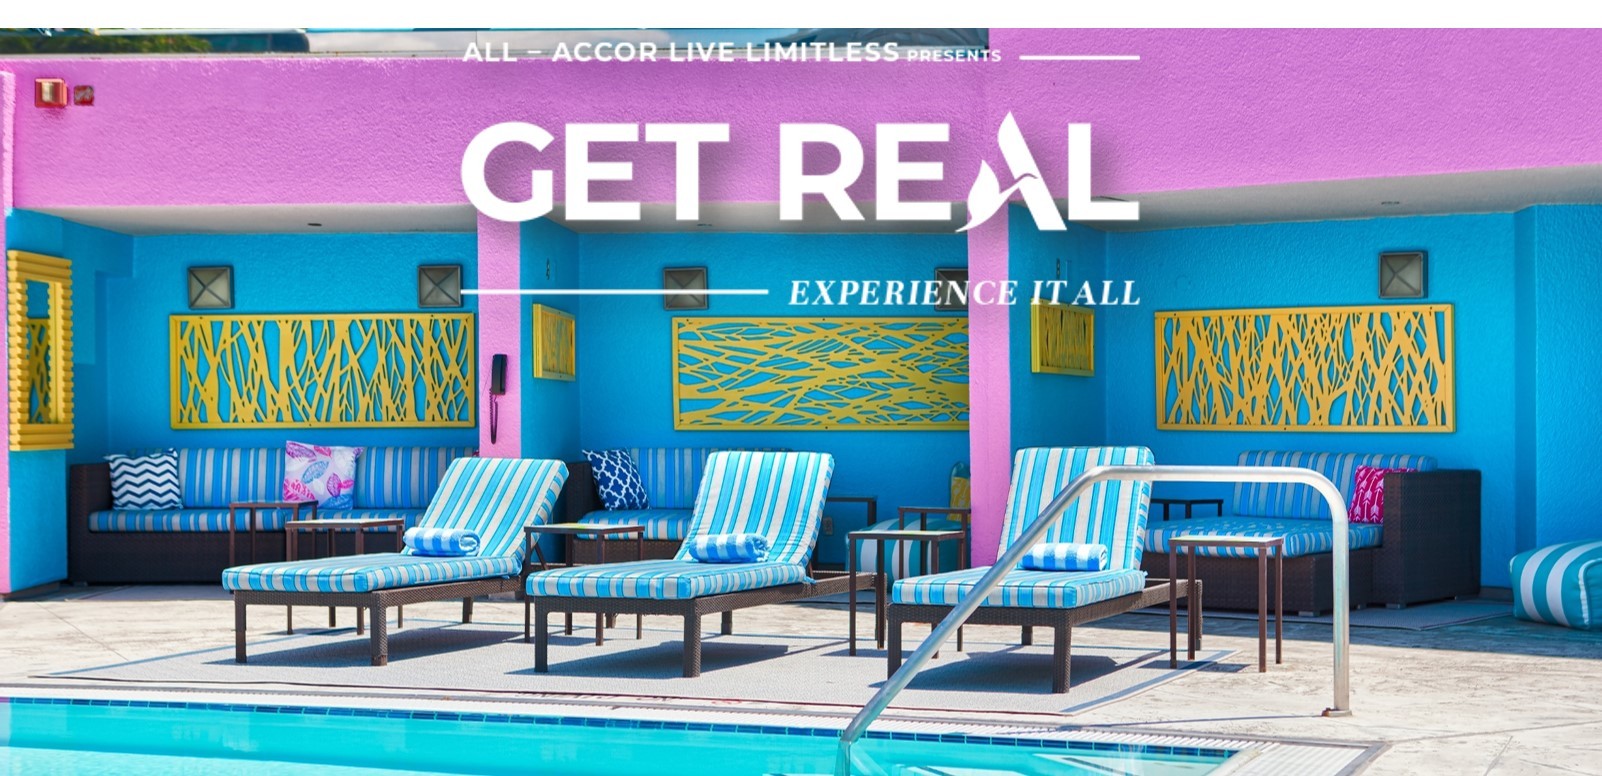 Photo of the hotel Sofitel Los Angeles at Beverly Hills: Get real experience it all summer campaign banner 2